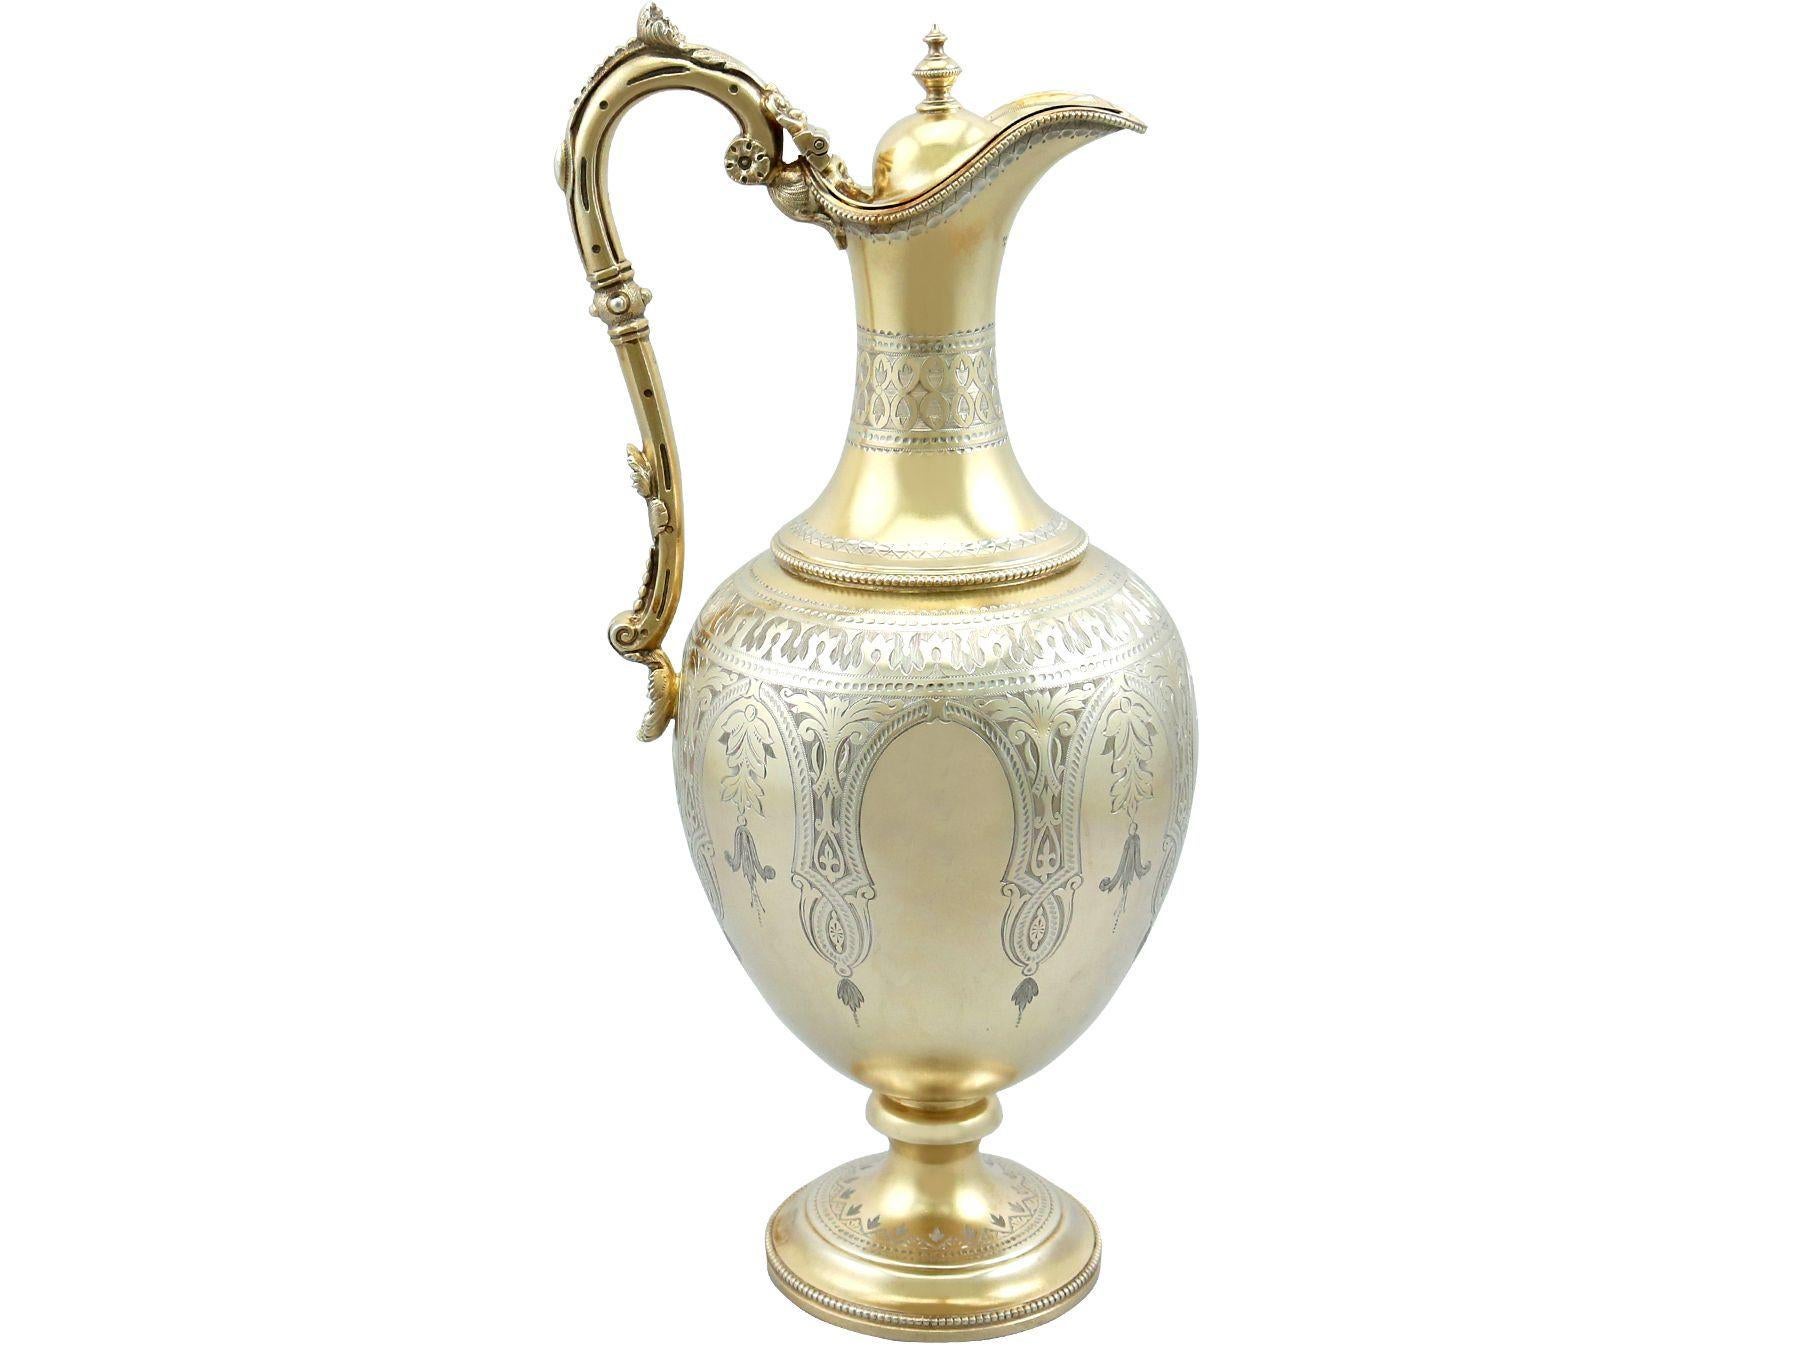 An exceptional, fine and impressive antique Victorian English sterling silver claret jug with matching goblets; an addition to our range of wine and drinks related silverware.

This exceptional Victorian sterling silver parcel gilt set consists of a